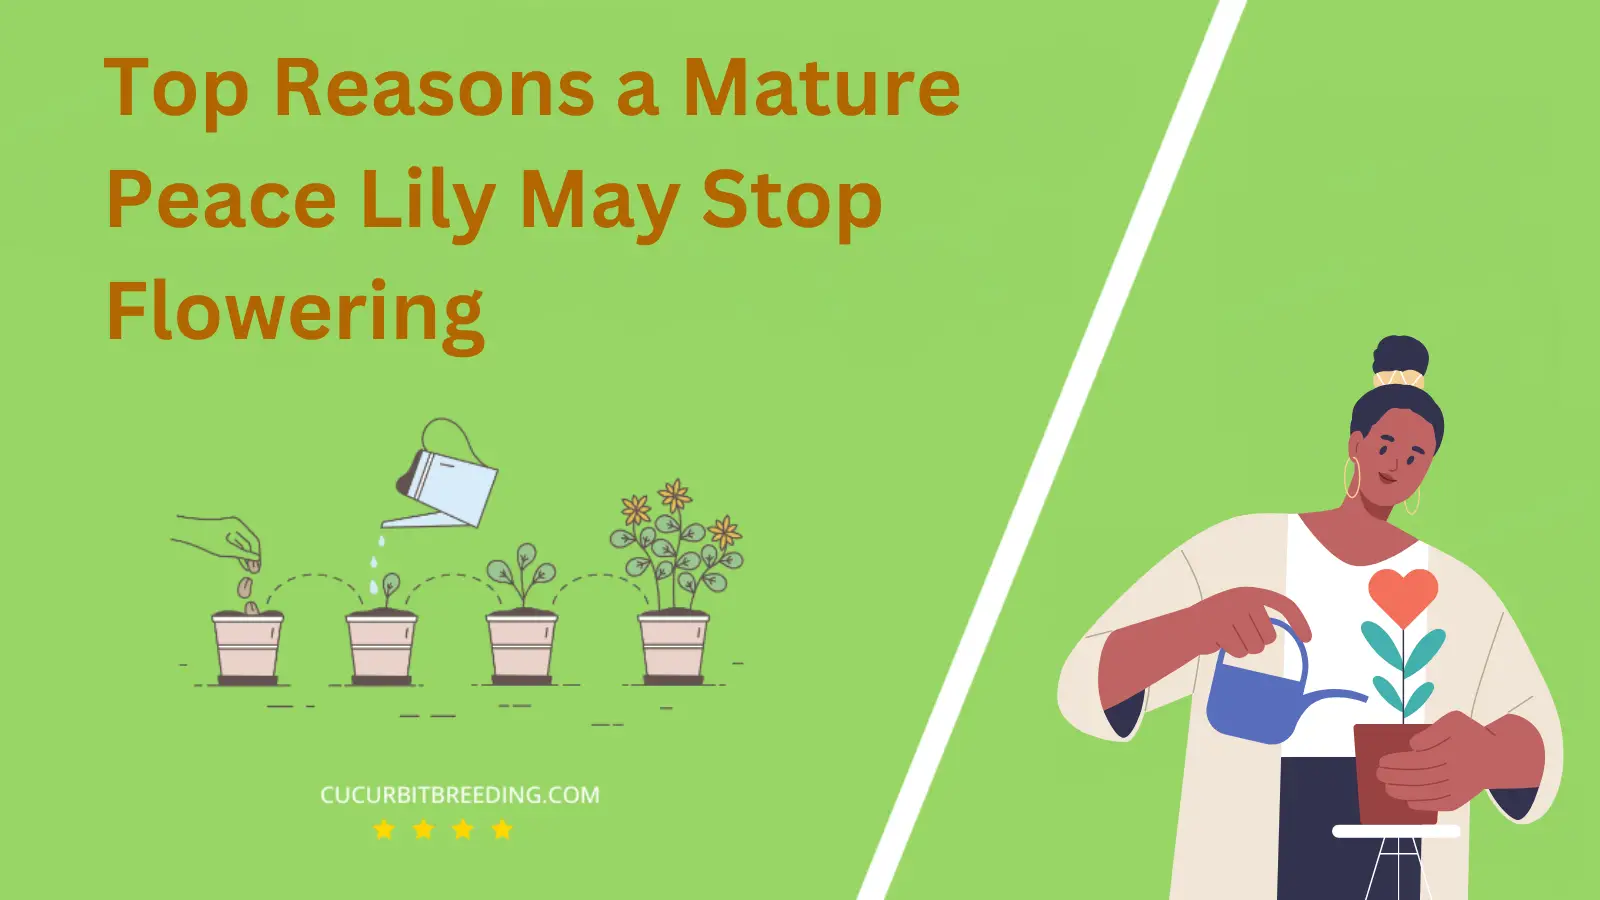 Top Reasons a Mature Peace Lily May Stop Flowering